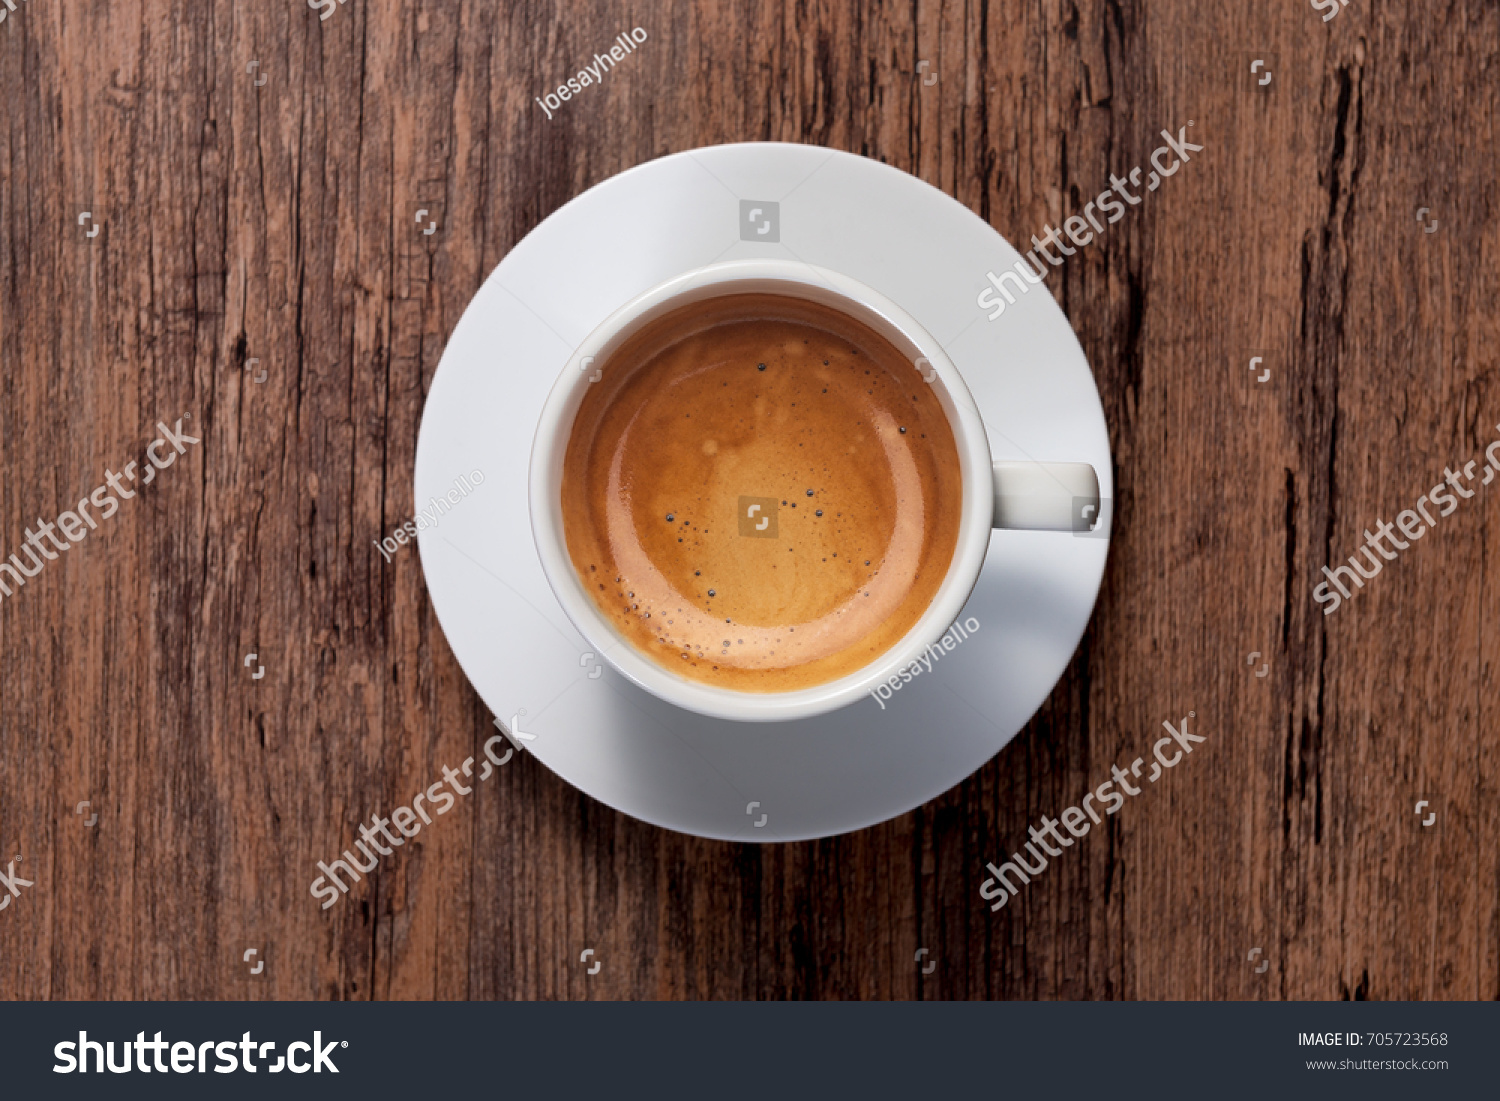 top view a cup of espresso coffee on wooden table background #705723568